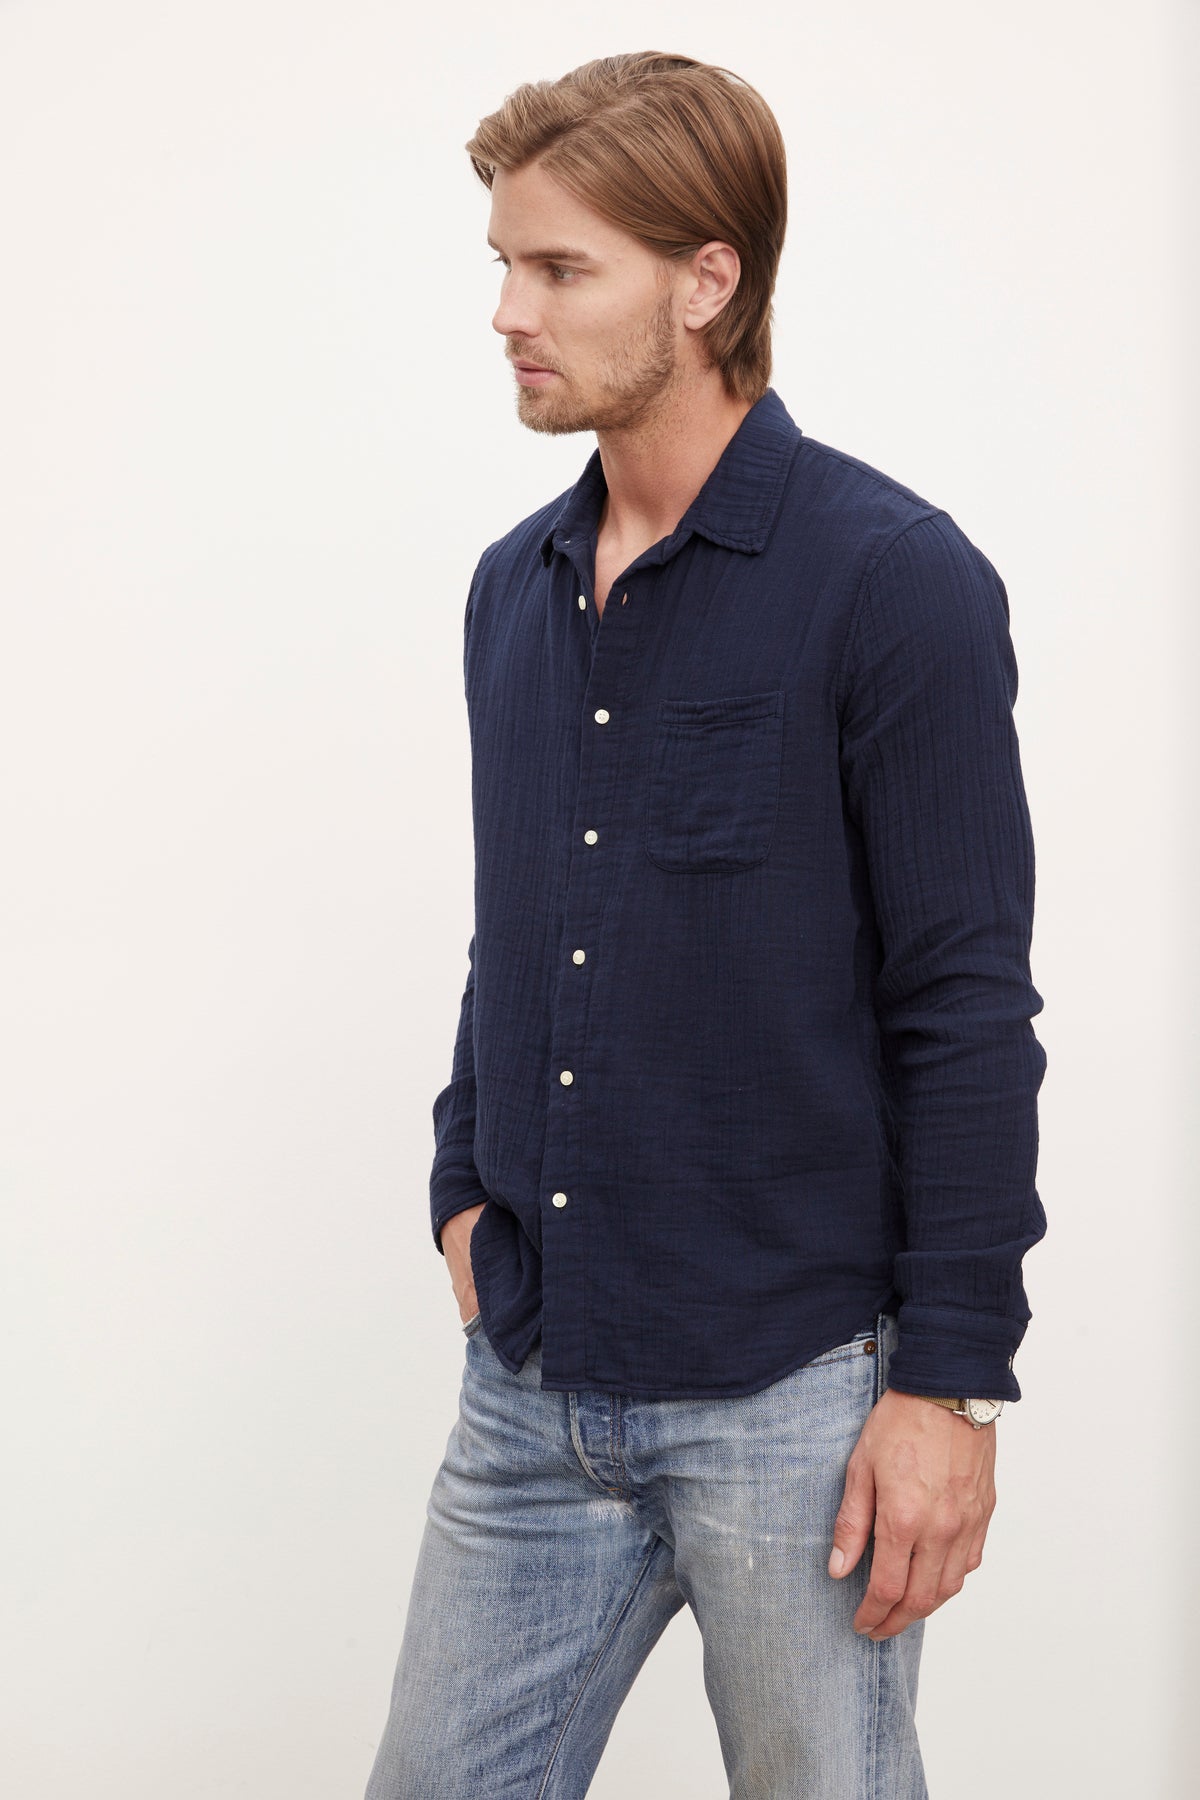 A man standing in a profile view, wearing a dark blue Velvet by Graham & Spencer ELTON COTTON GAUZE button-up shirt and light blue jeans, looking to the side against a plain background.-36009394929857